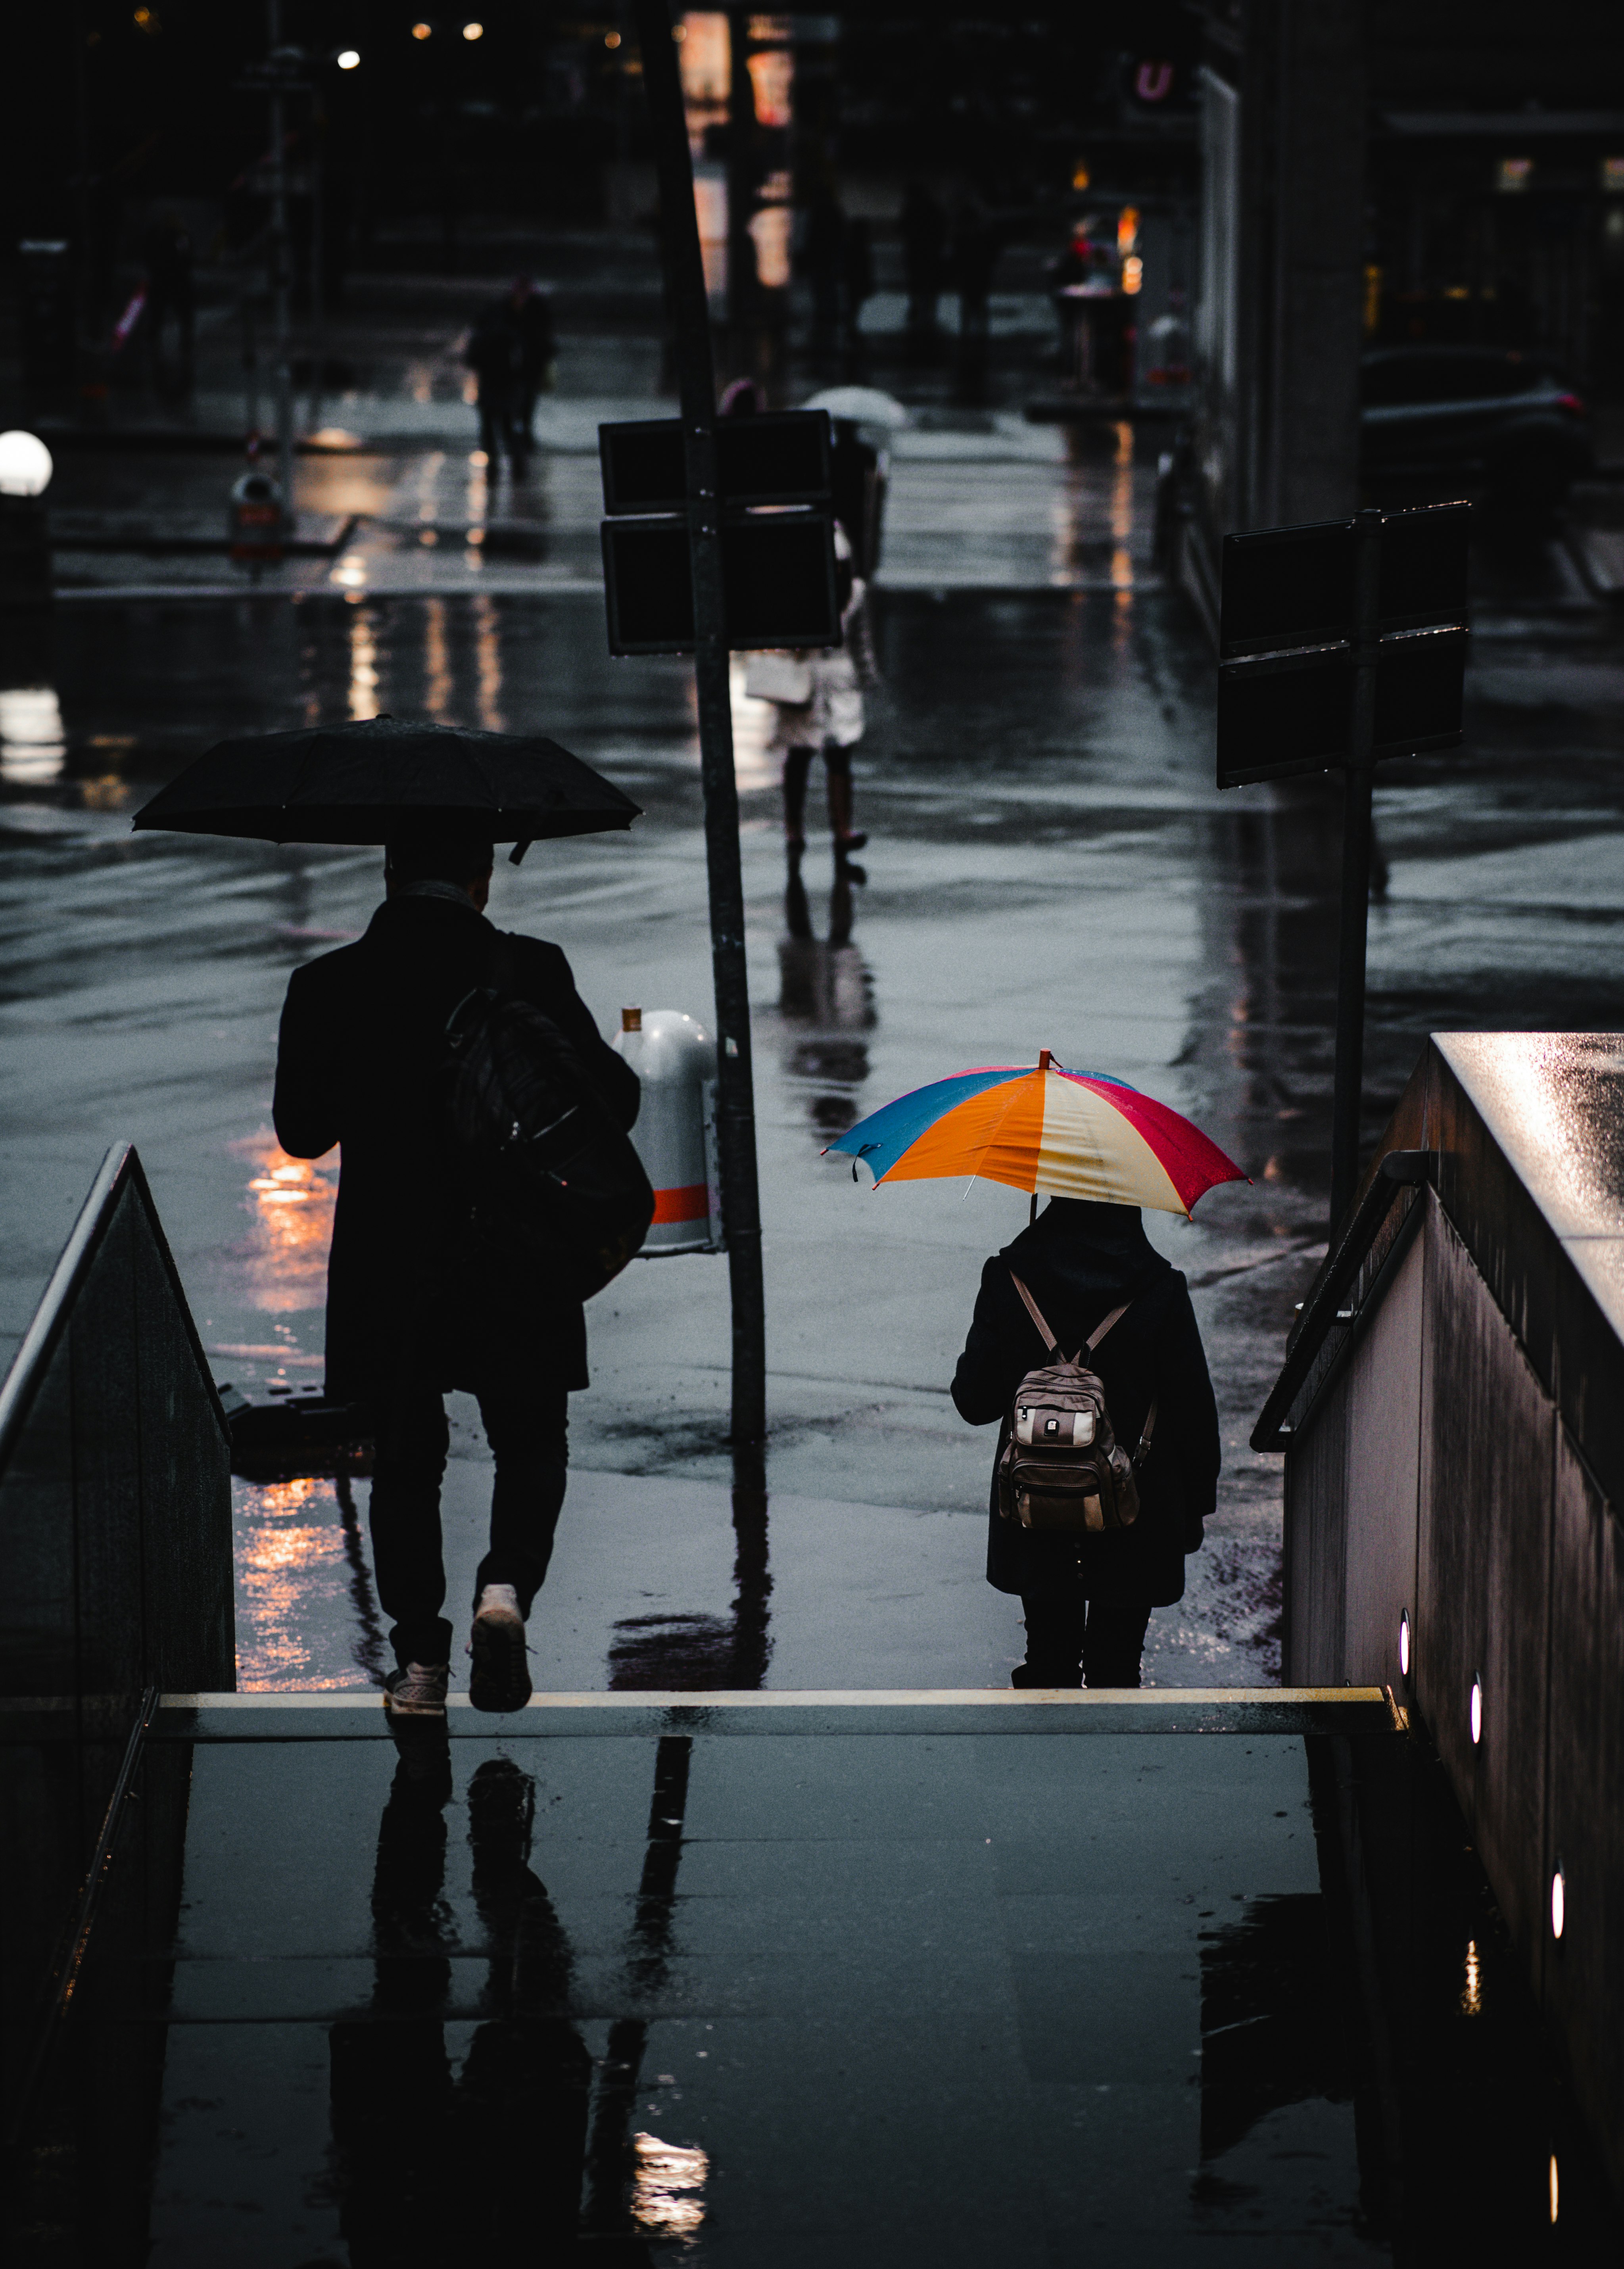 person in black coat holding umbrella standing on sidewalk during night time